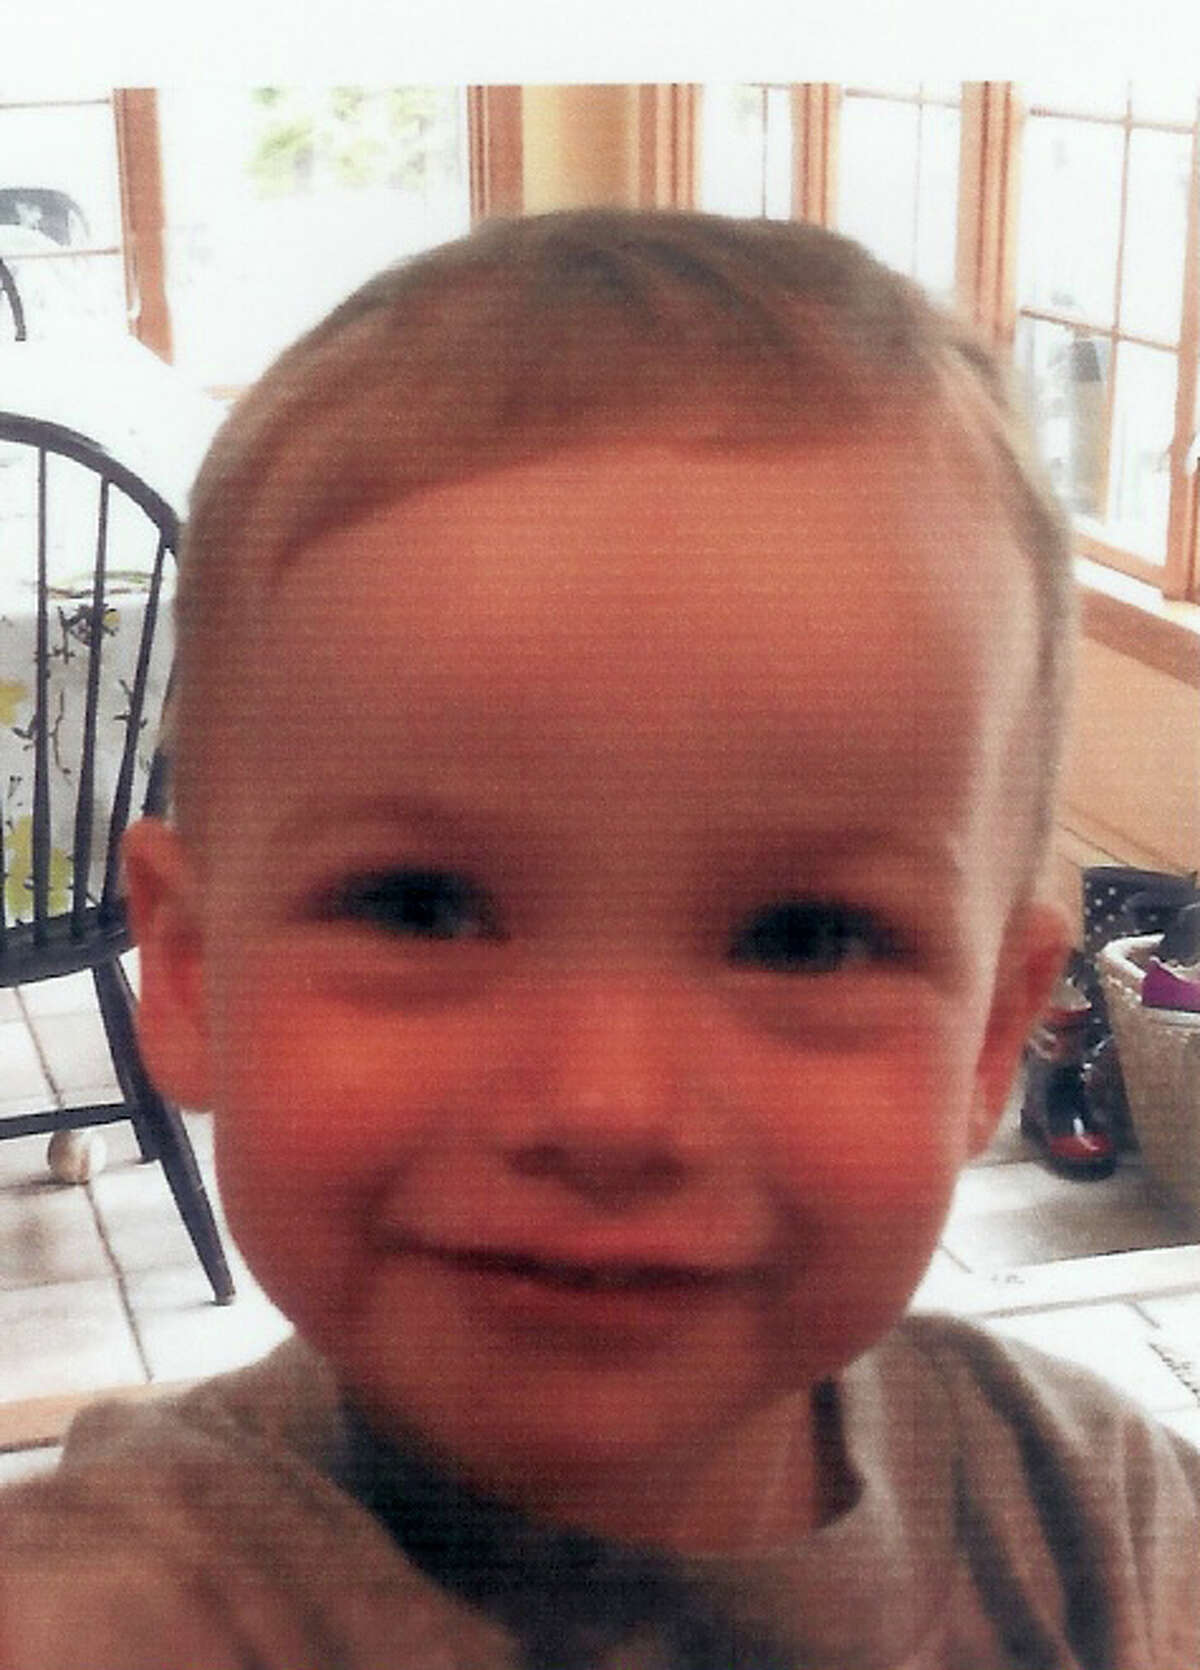 Declan Leo Cooney, 23 months old, died Friday, June 6, from injuries he sustained after being hit by a car in his driveway.